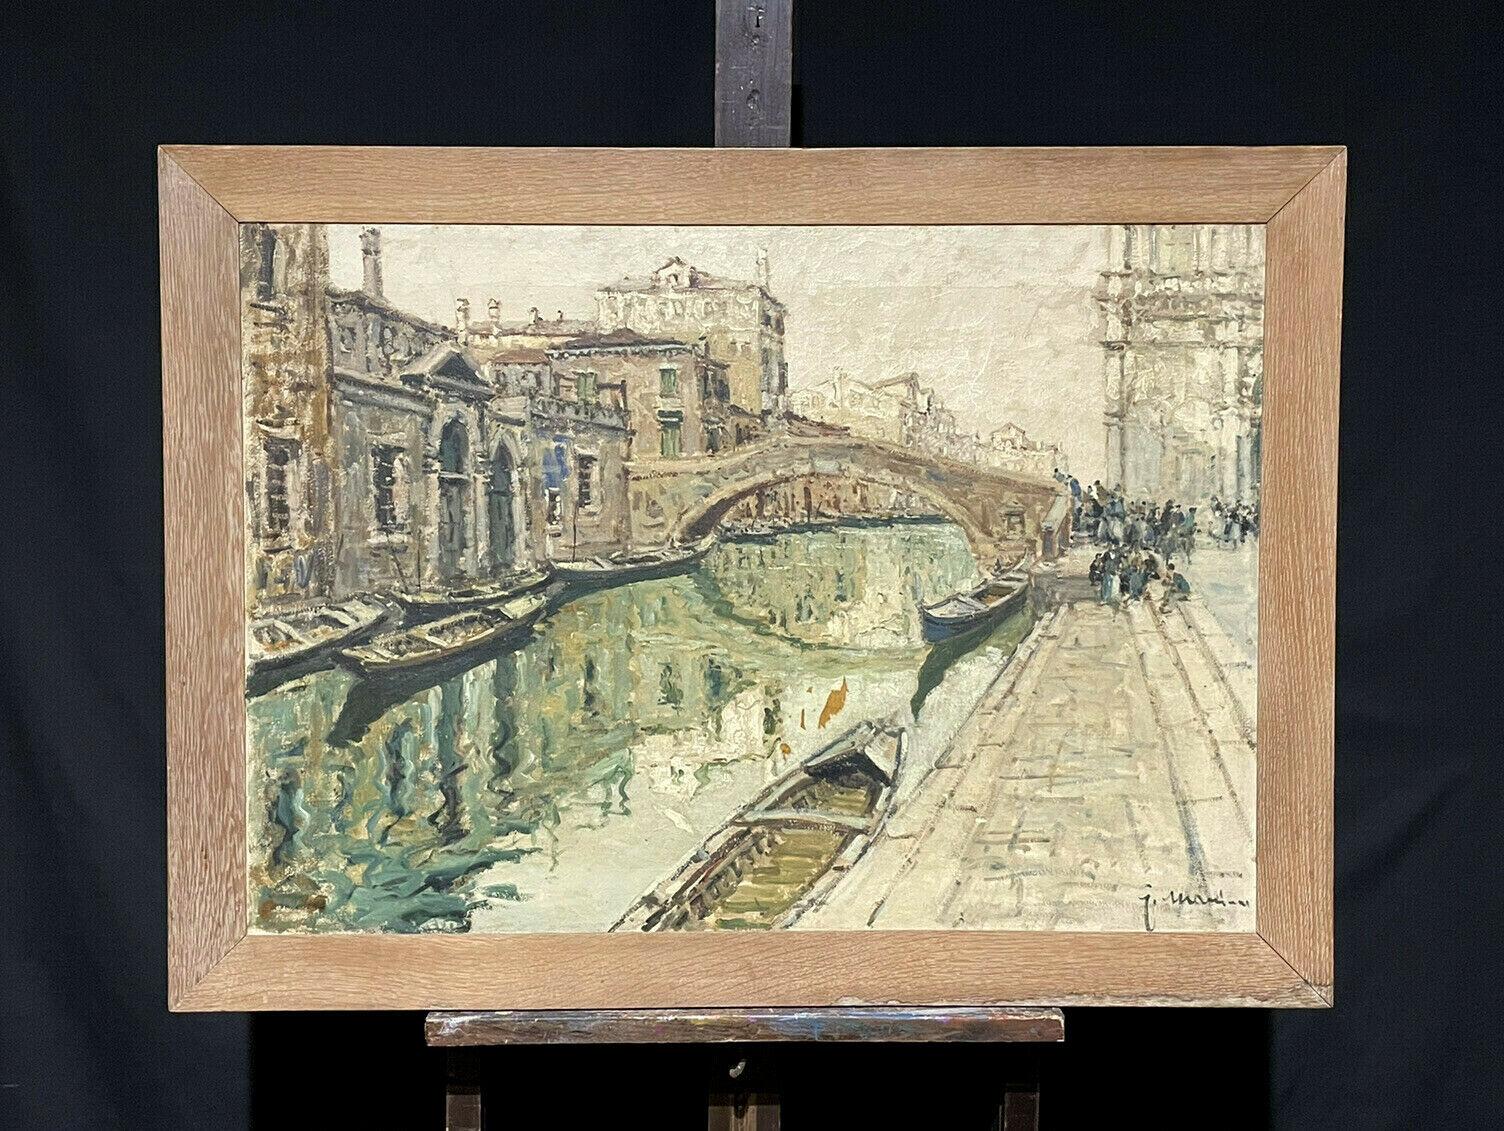 VERY LARGE 1960'S ITALIAN SIGNED OIL - MOODY IMPRESSIONIST VENICE CANAL SCENE - Painting by Italian Signed